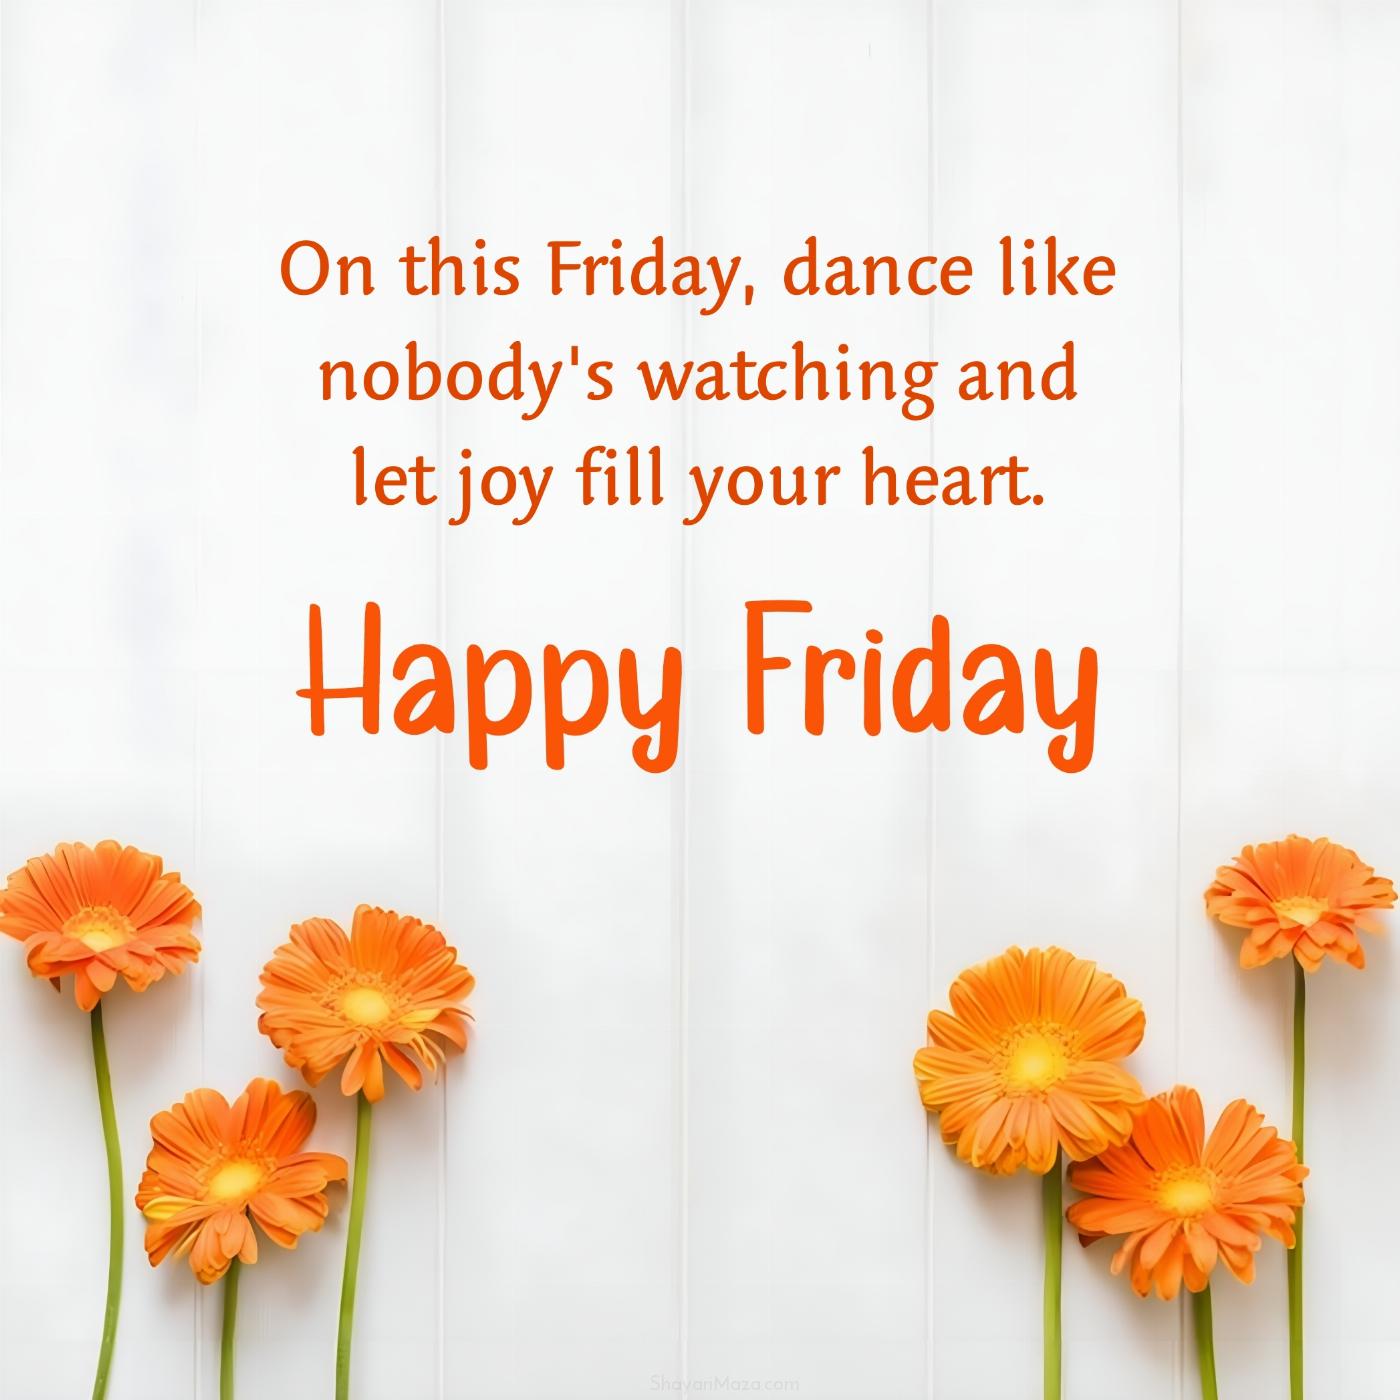 On this Friday dance like nobody's watching and let joy fill your heart